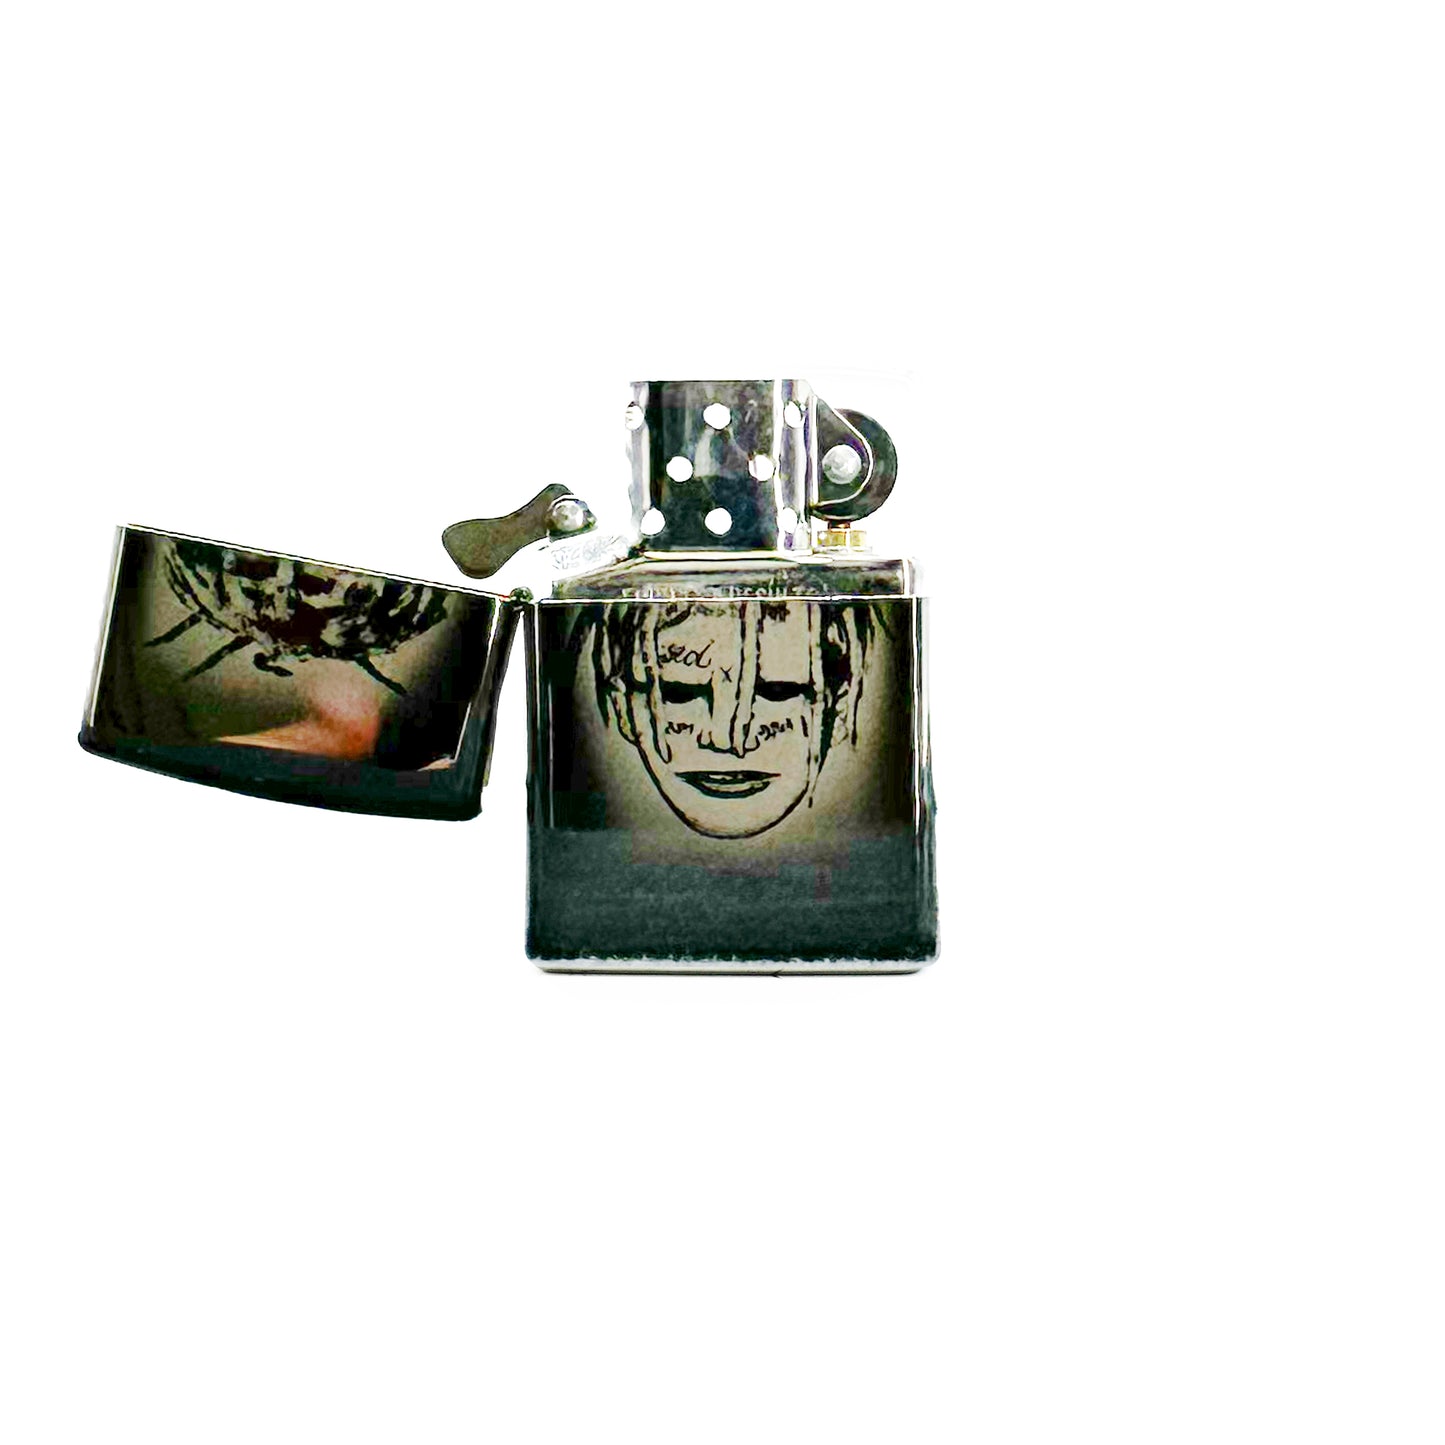 Chapter 17 - Zippo Lighter - Ever Dream This Man? - Black Ice